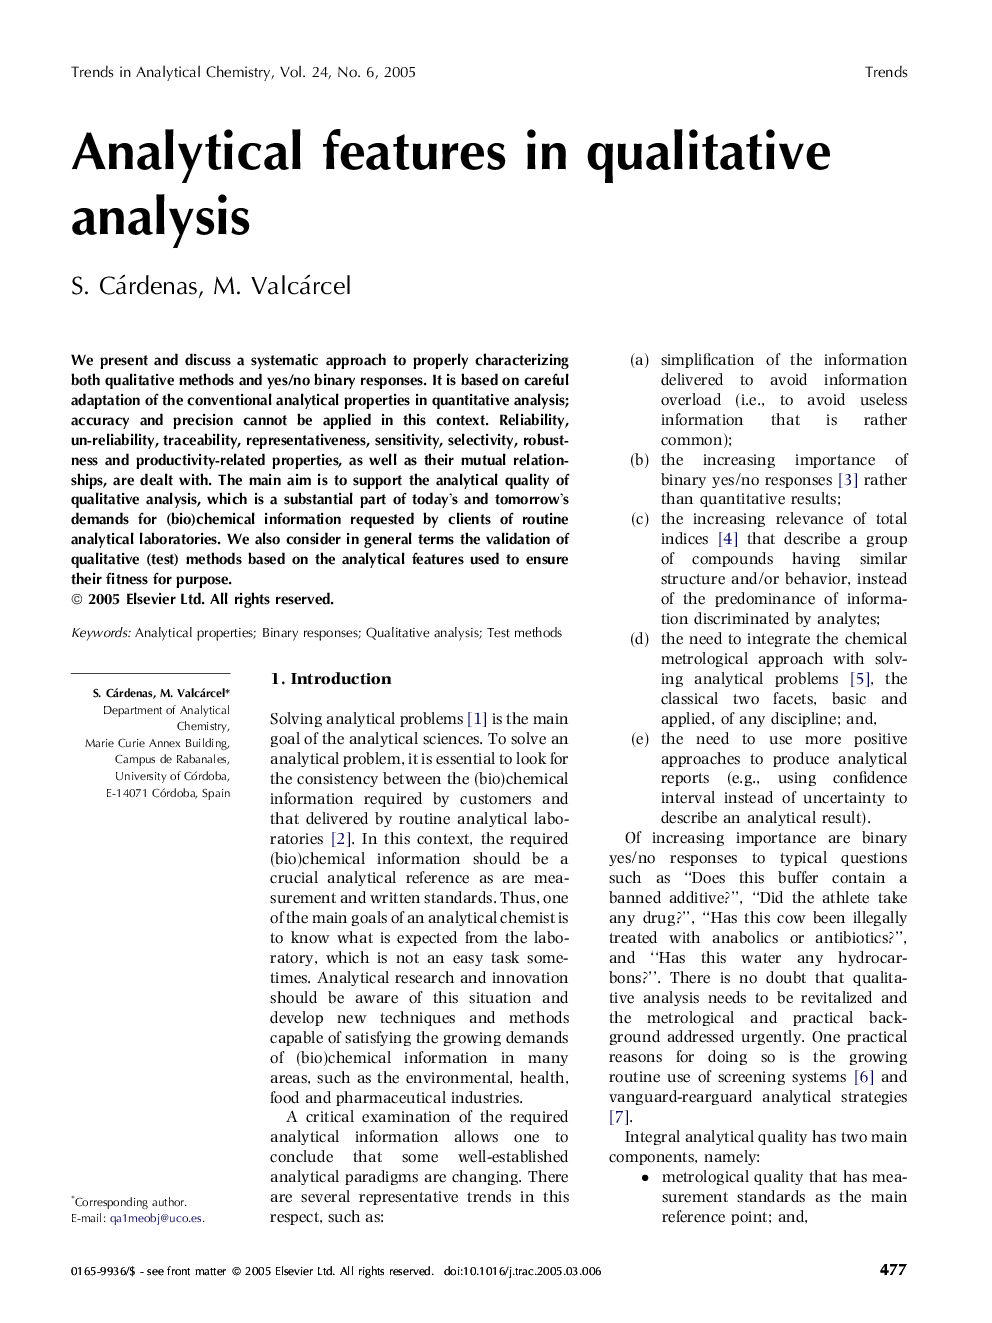 Analytical features in qualitative analysis